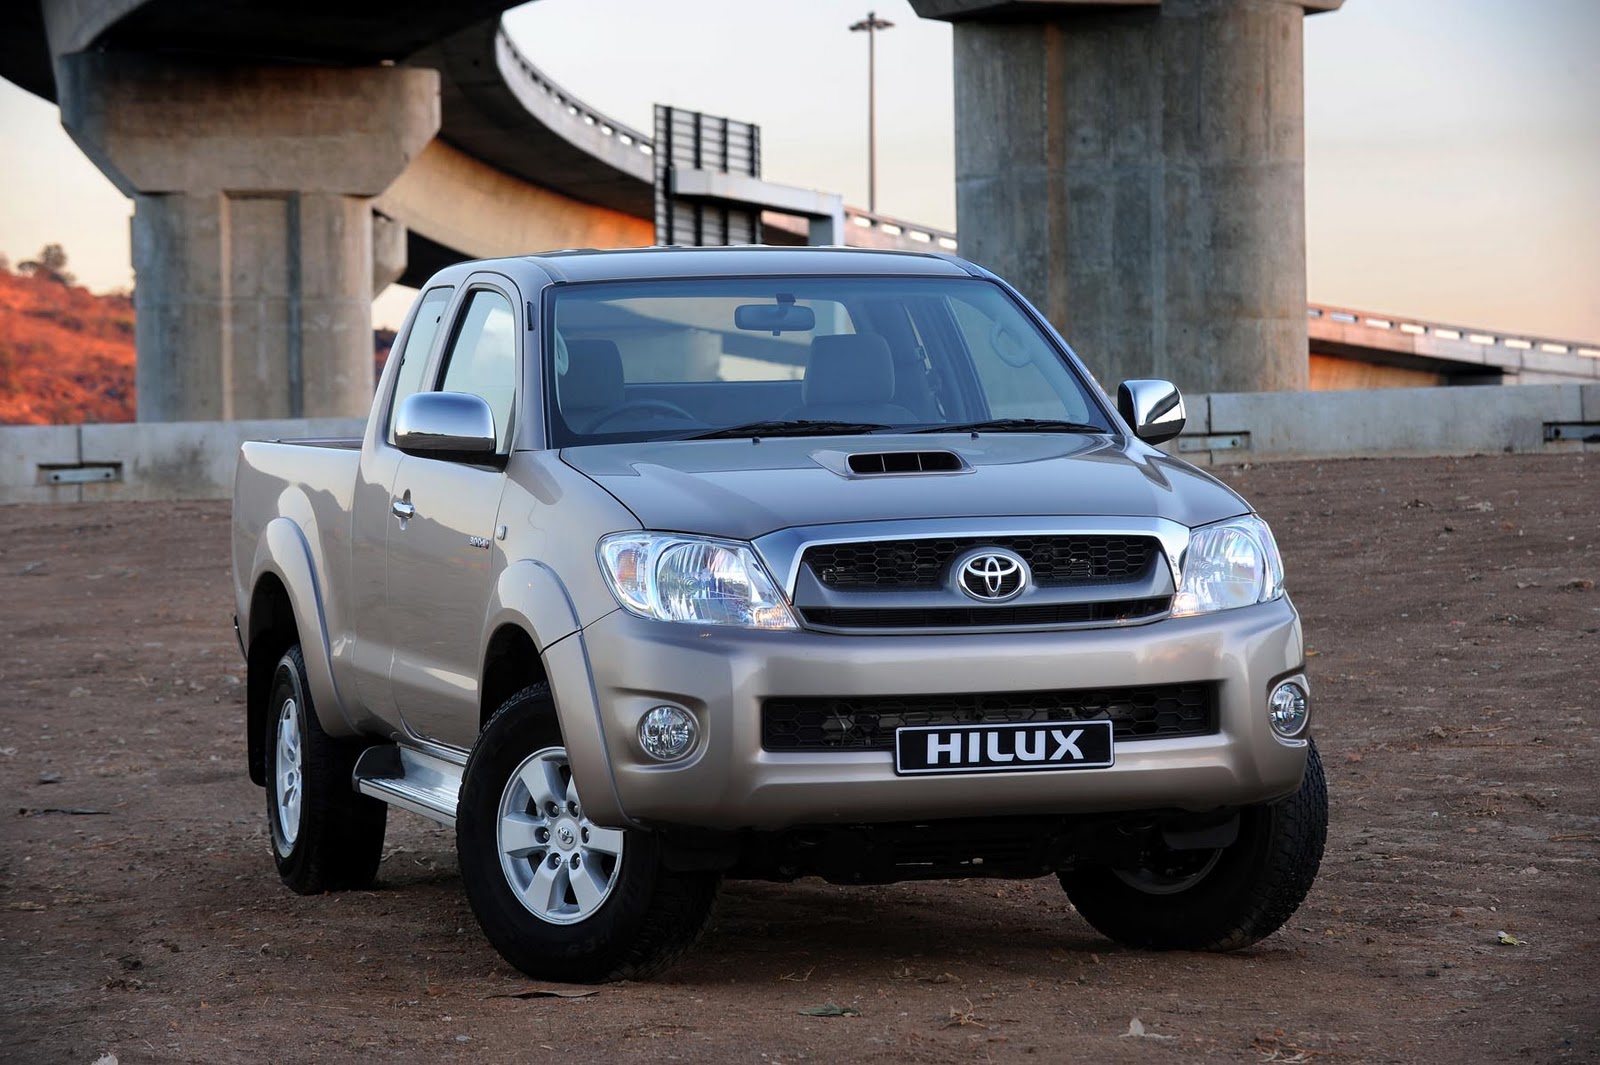 IN4RIDE: NEW HILUX XTRA CAB NOW AVAILABLE